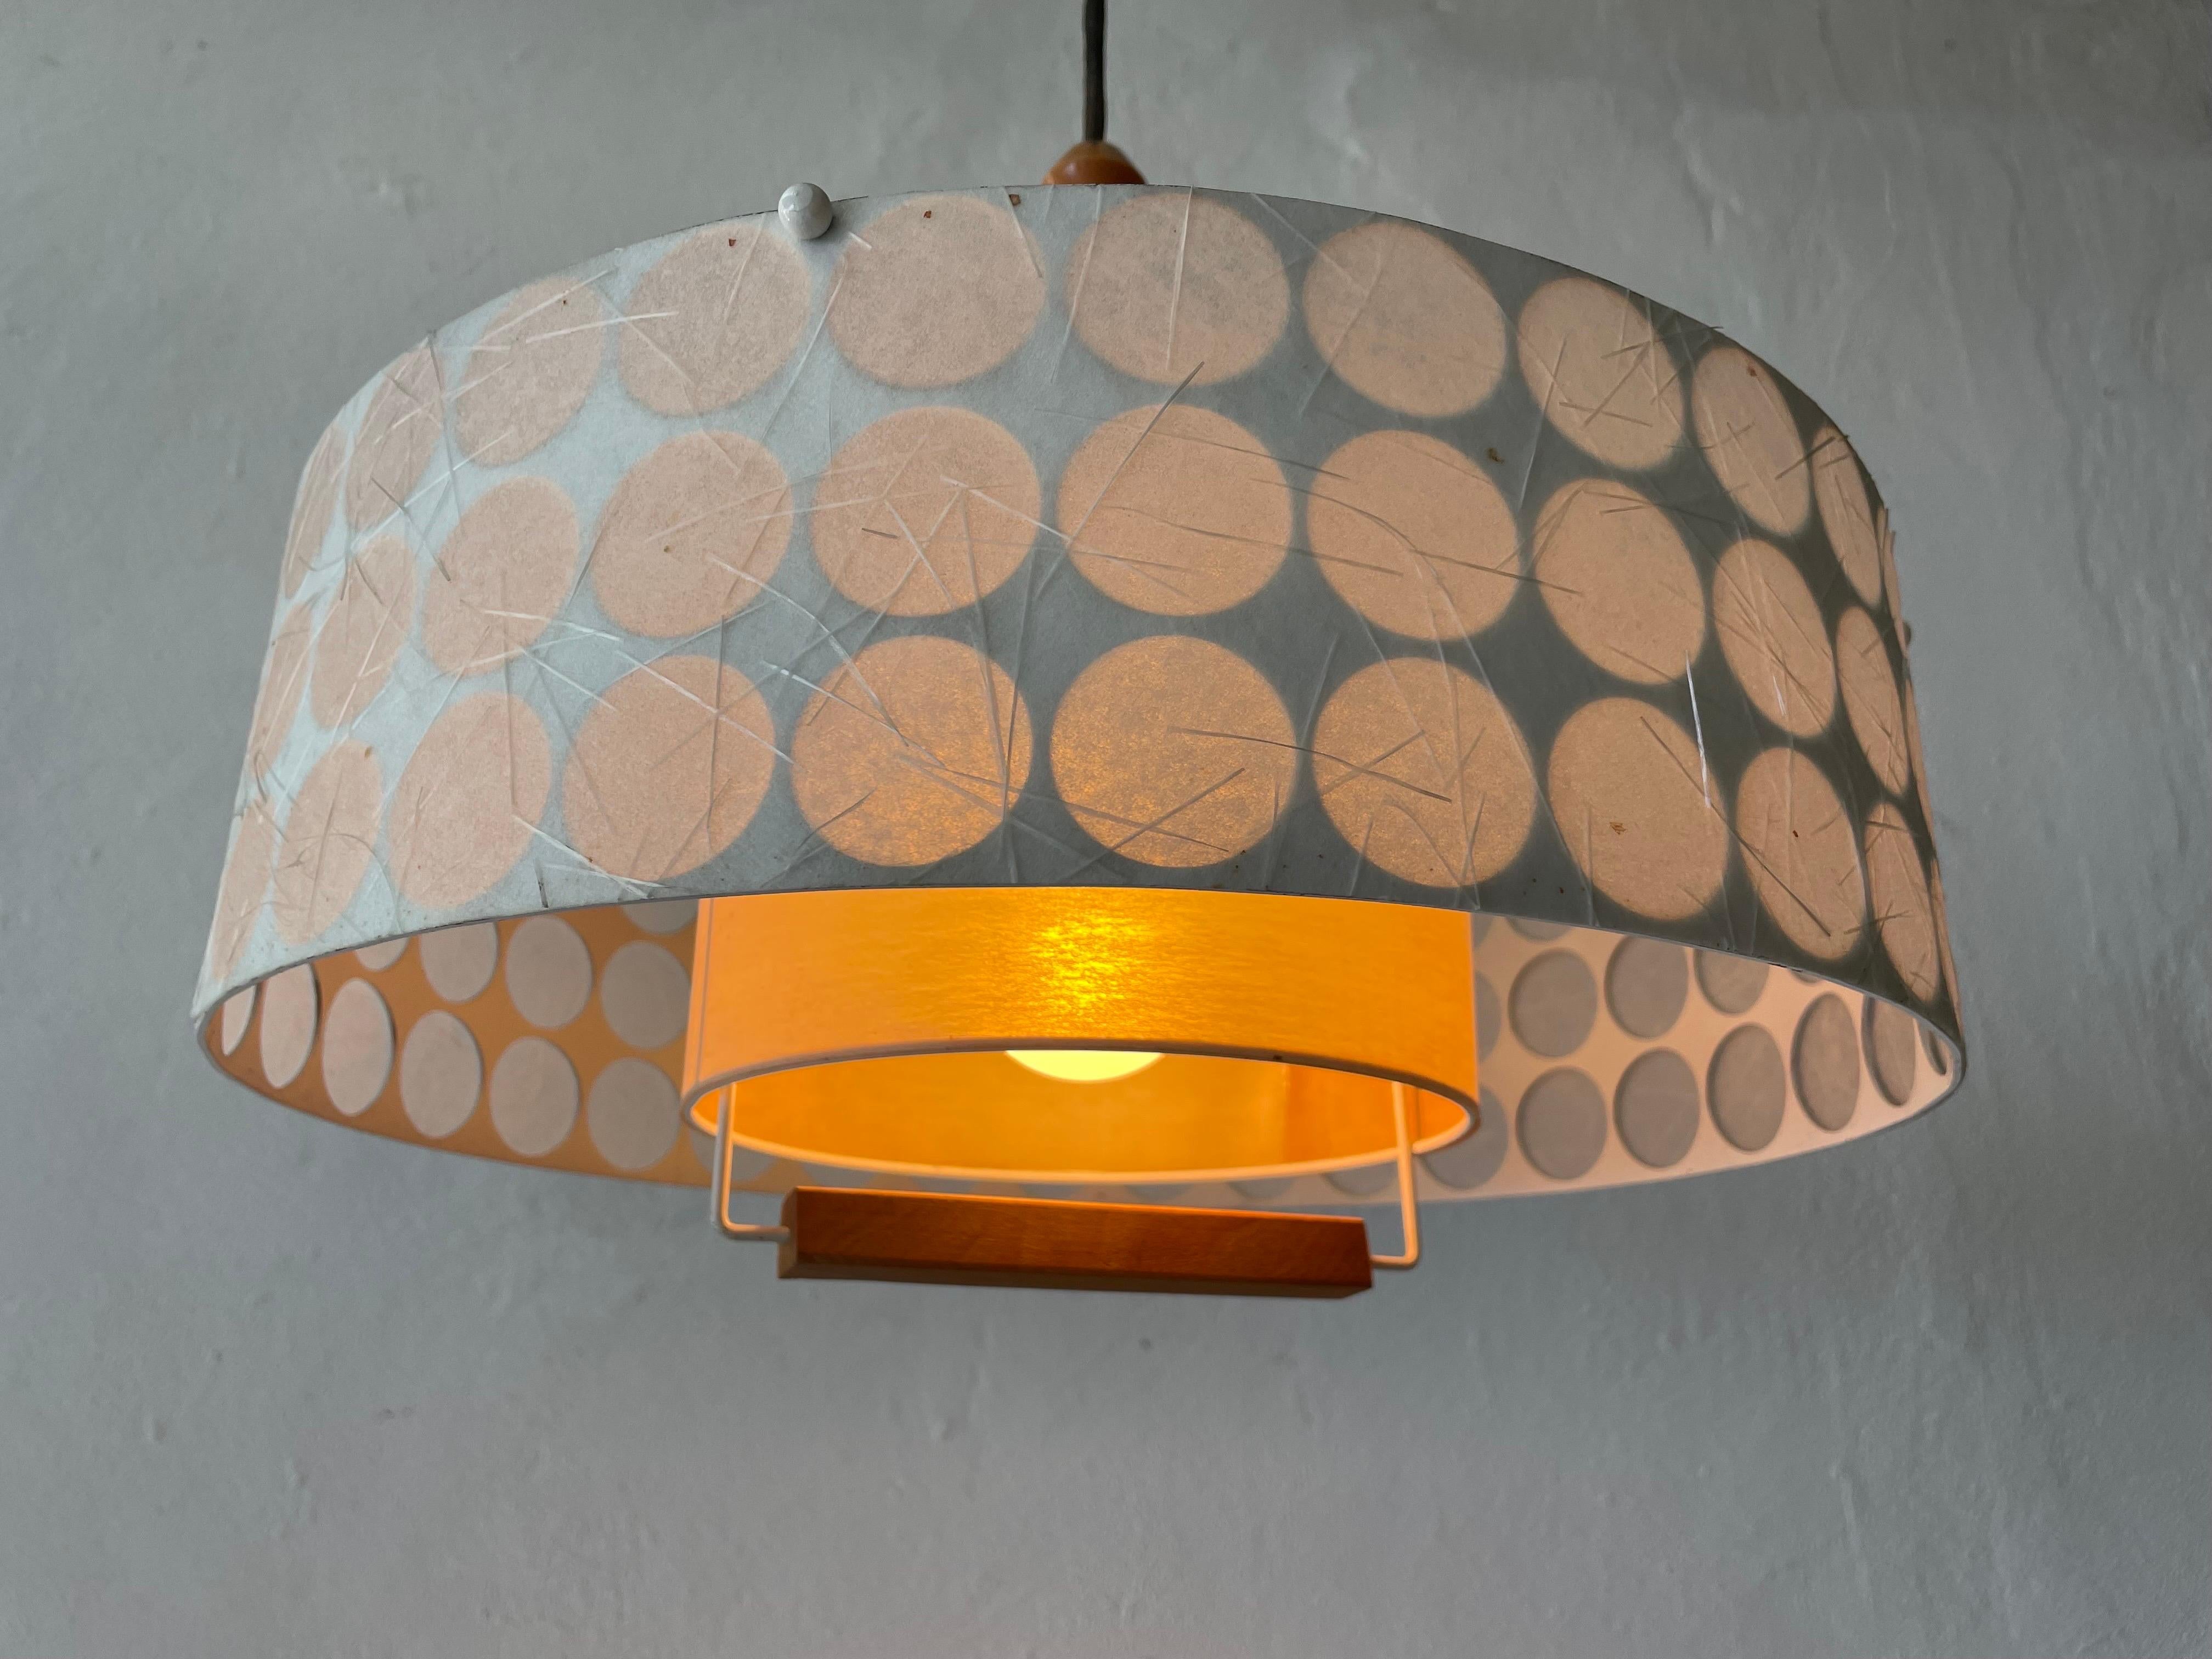 Rare Atomic Shade Pendant Lamp by Temde, 1960s, Switzerland For Sale 8